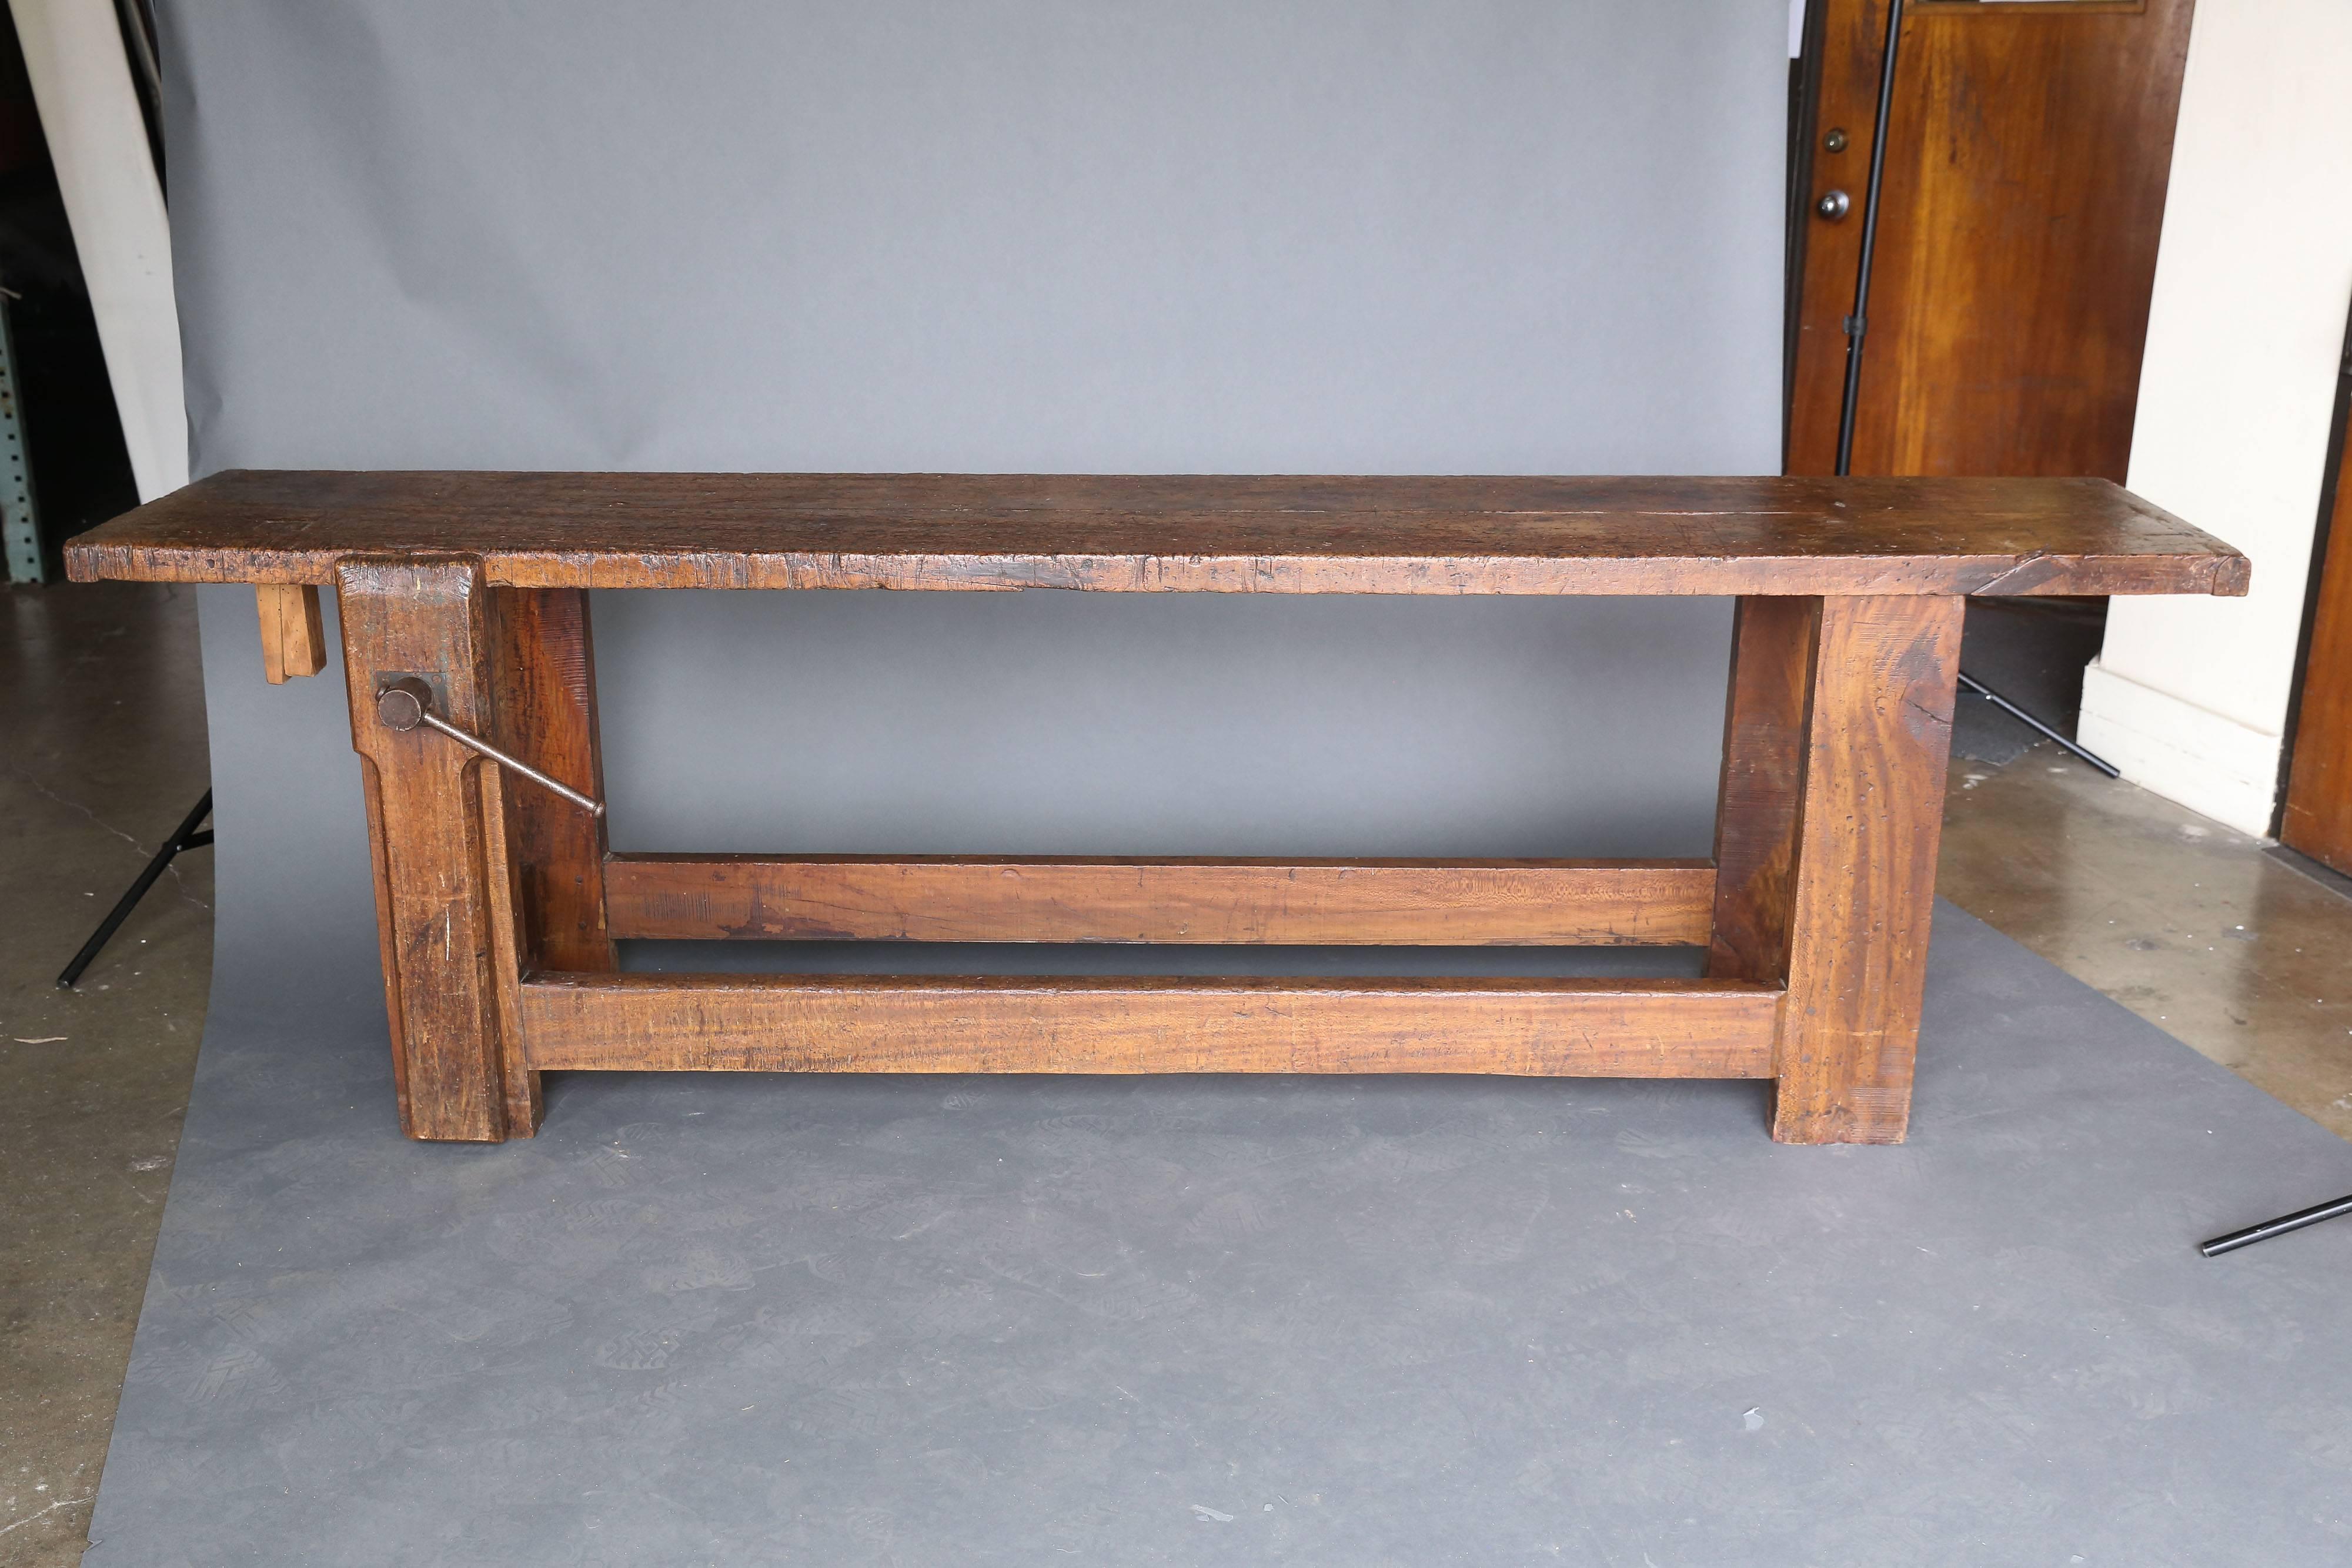 19th century beechwood Workbench from France with leg vise. Simple lines and beautiful weathered patina.